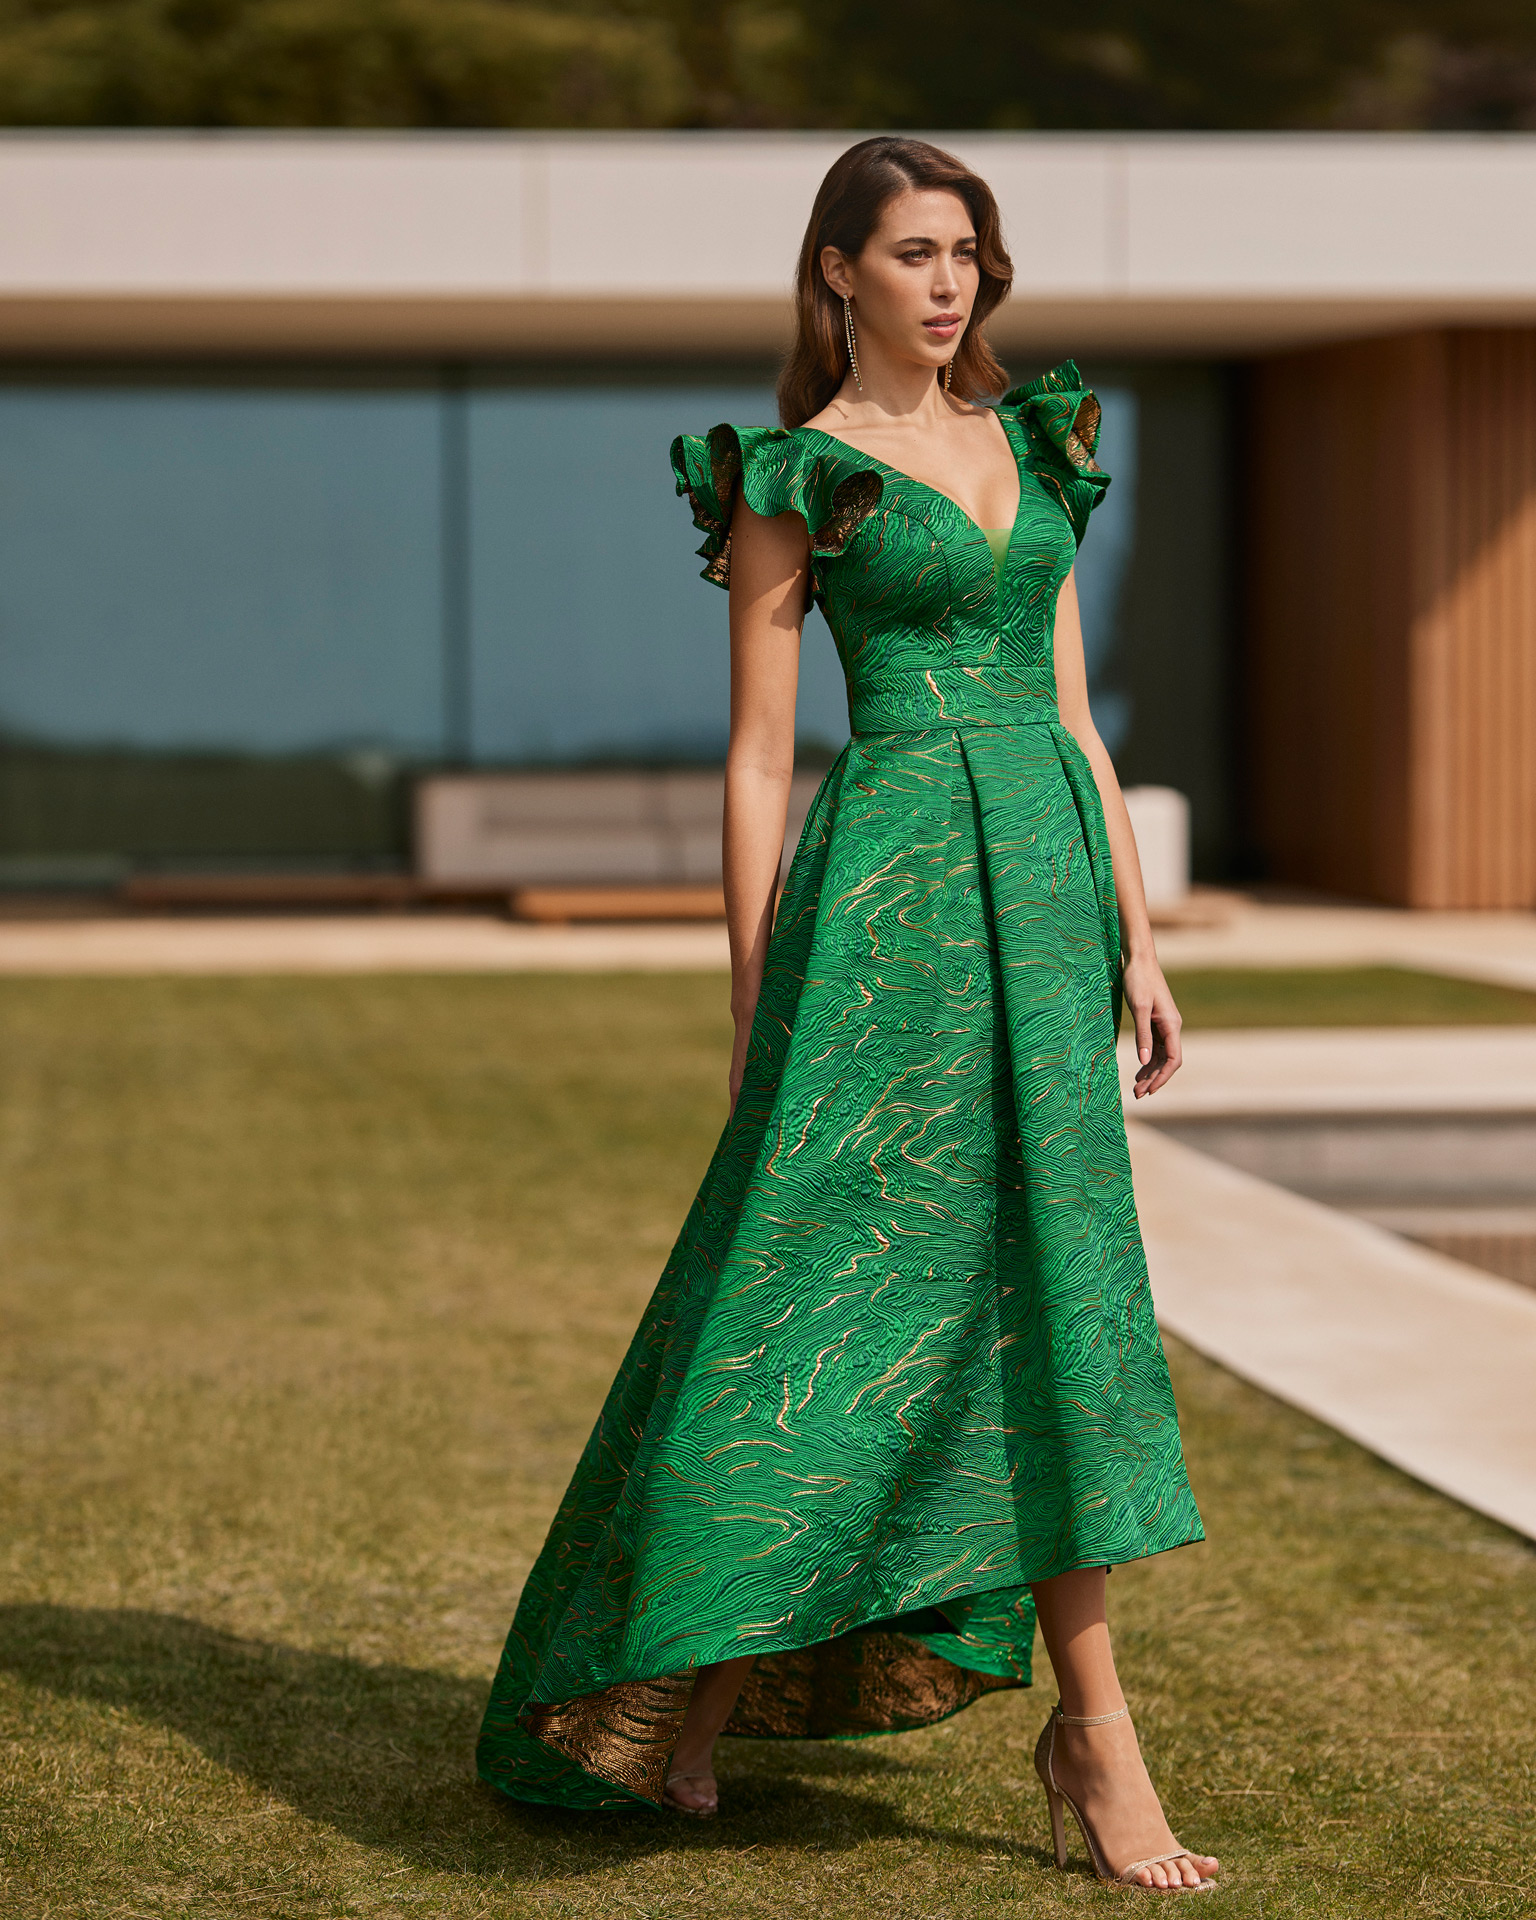 Princess style long dress. Made with brocade. With V-neckline, plunging back and straps. Marfil Barcelona look for parties and celebrations. MARFIL_BARCELONA.